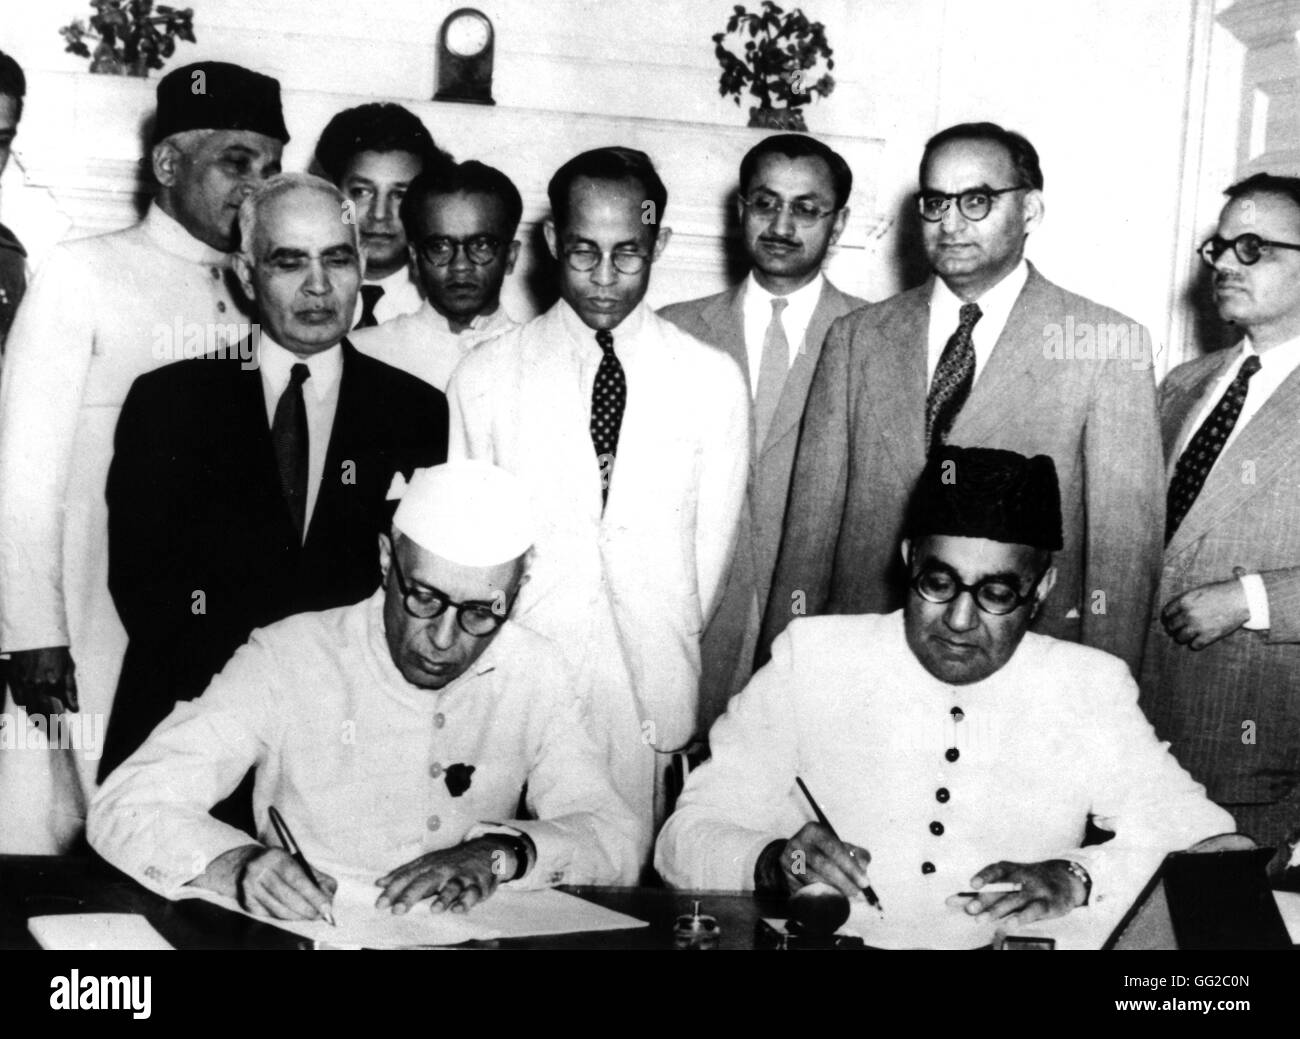 Nehru and Ali Khan (prime minister of Pakistan), during the signing of the agreeement between India and Pakistan 1947 India National Archives - Washington Stock Photo